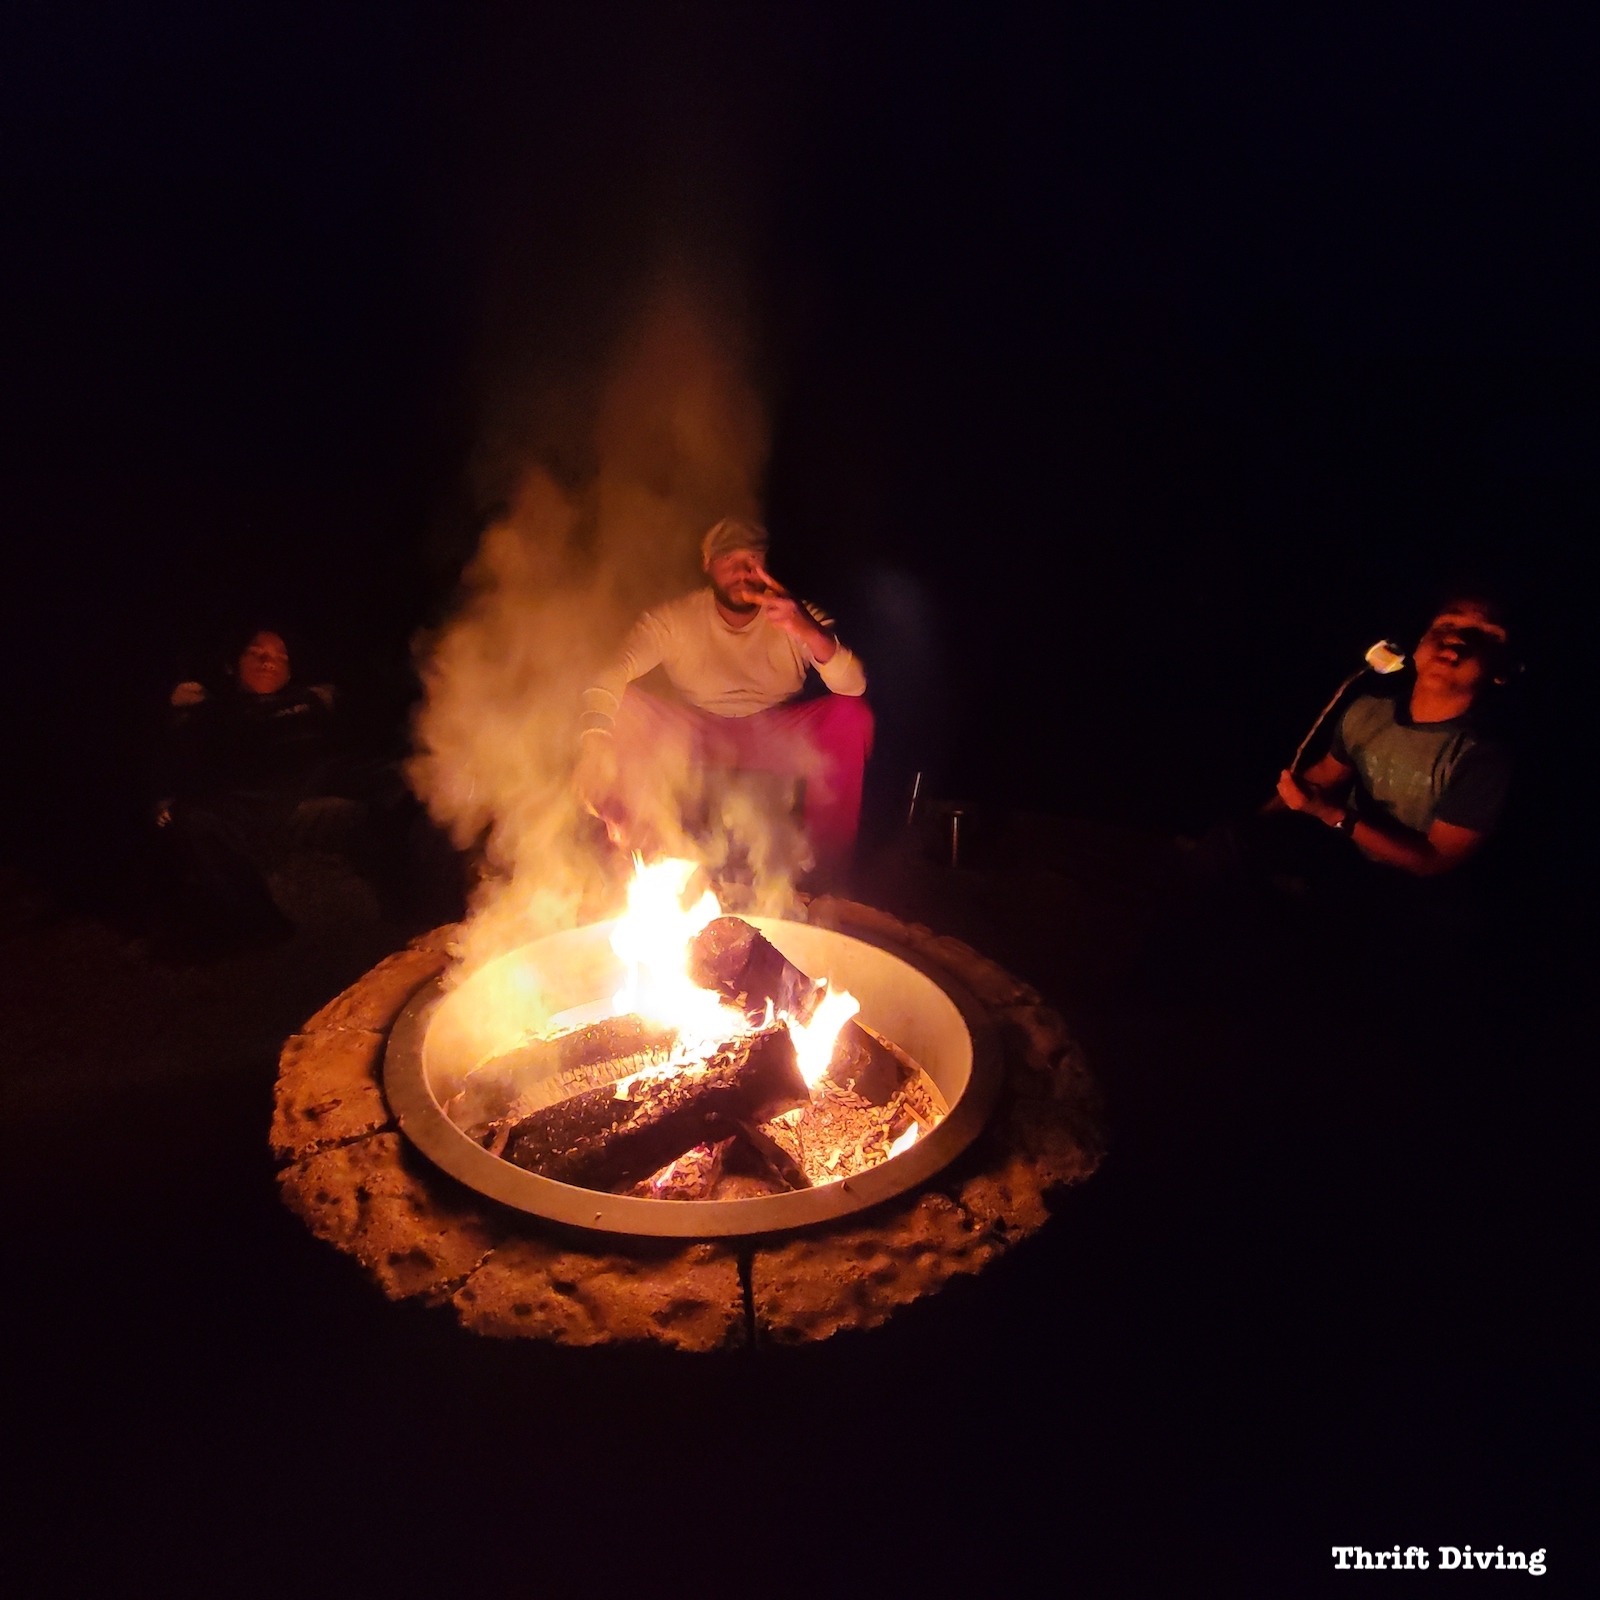 10 Questions to Ask Before Starting a FIRE This Summer - Before you install a fire pit in your backyard, always make sure that the kids know the rules of the fire pit and that if you're a caregiver for someone with Alzheimer's, that they're kept safe, too. - Thrift Diving